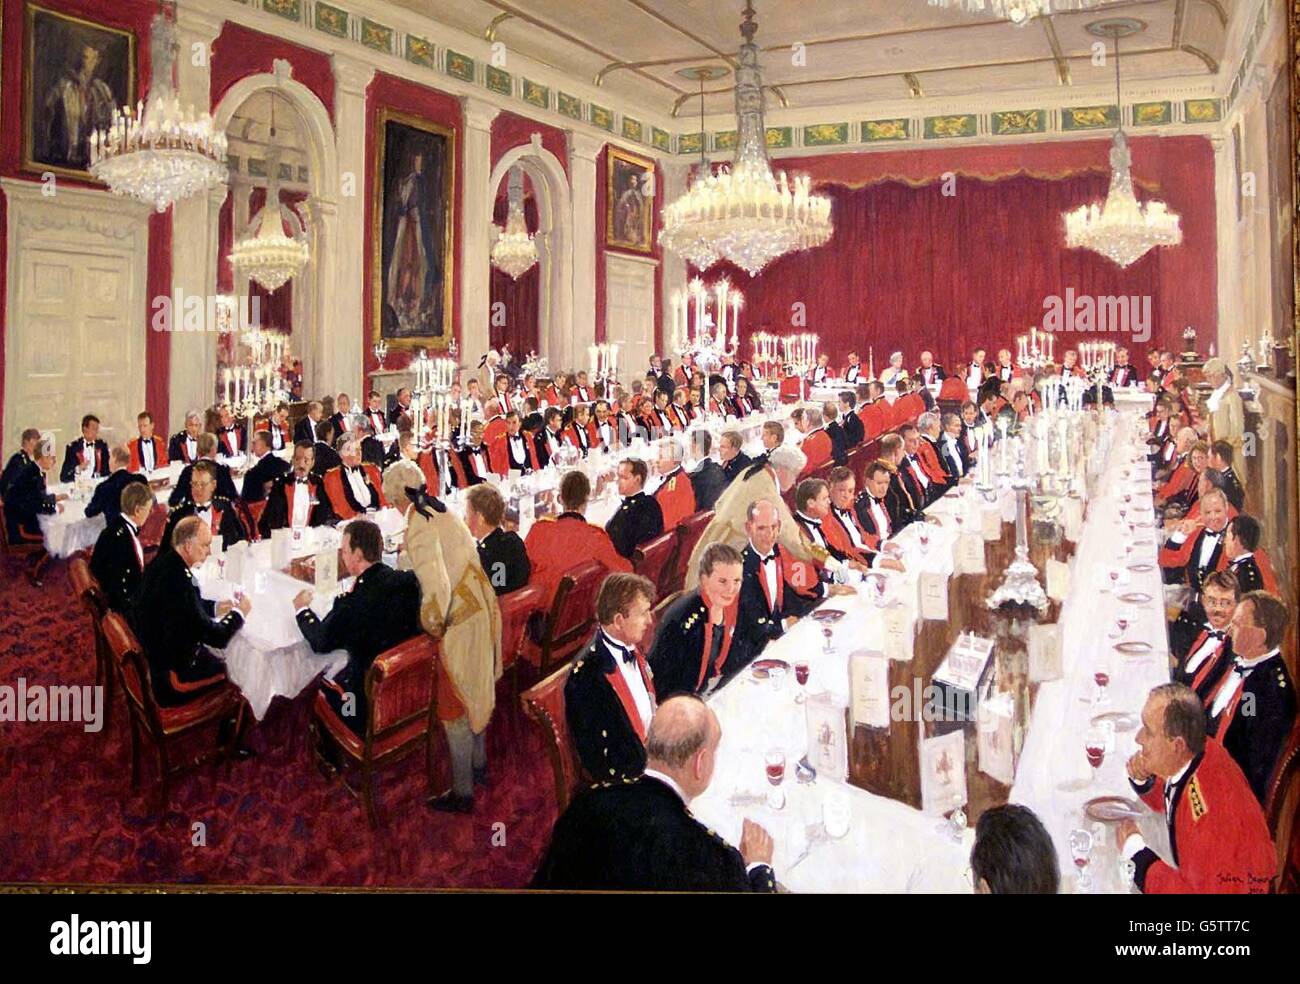 A painting of the 'Queen's dinner, December 4th 2000', painted by Julian Barrow, one of the exhibits at the Royal Artillery Officers' mess in Woolwich , which opened to the public for the first time in its 200 year history. Stock Photo